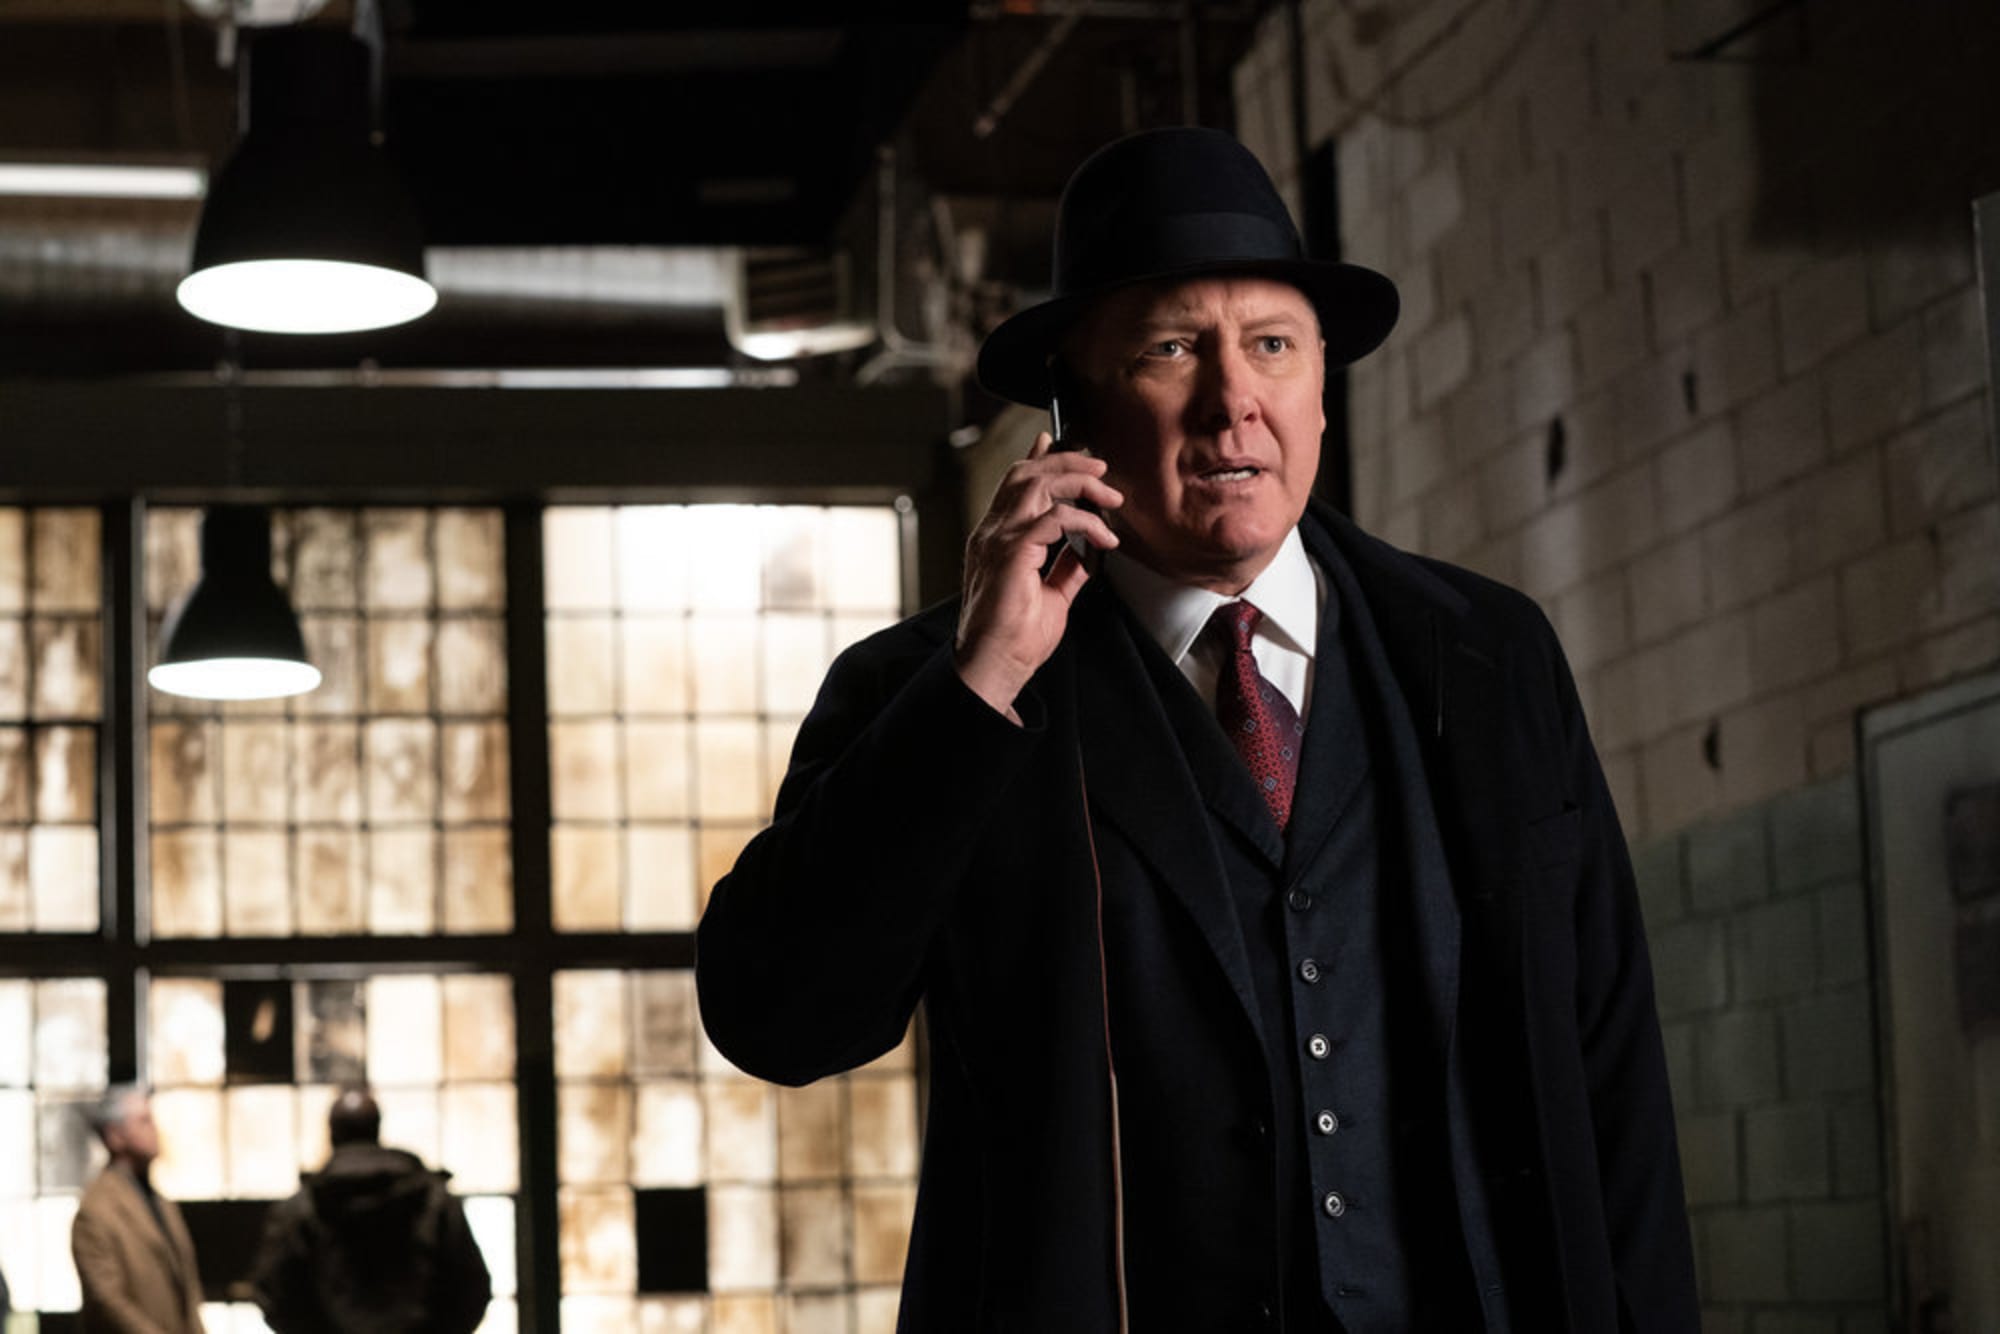 'The Blacklist' Season 8: When It Starts and How to Watch Online